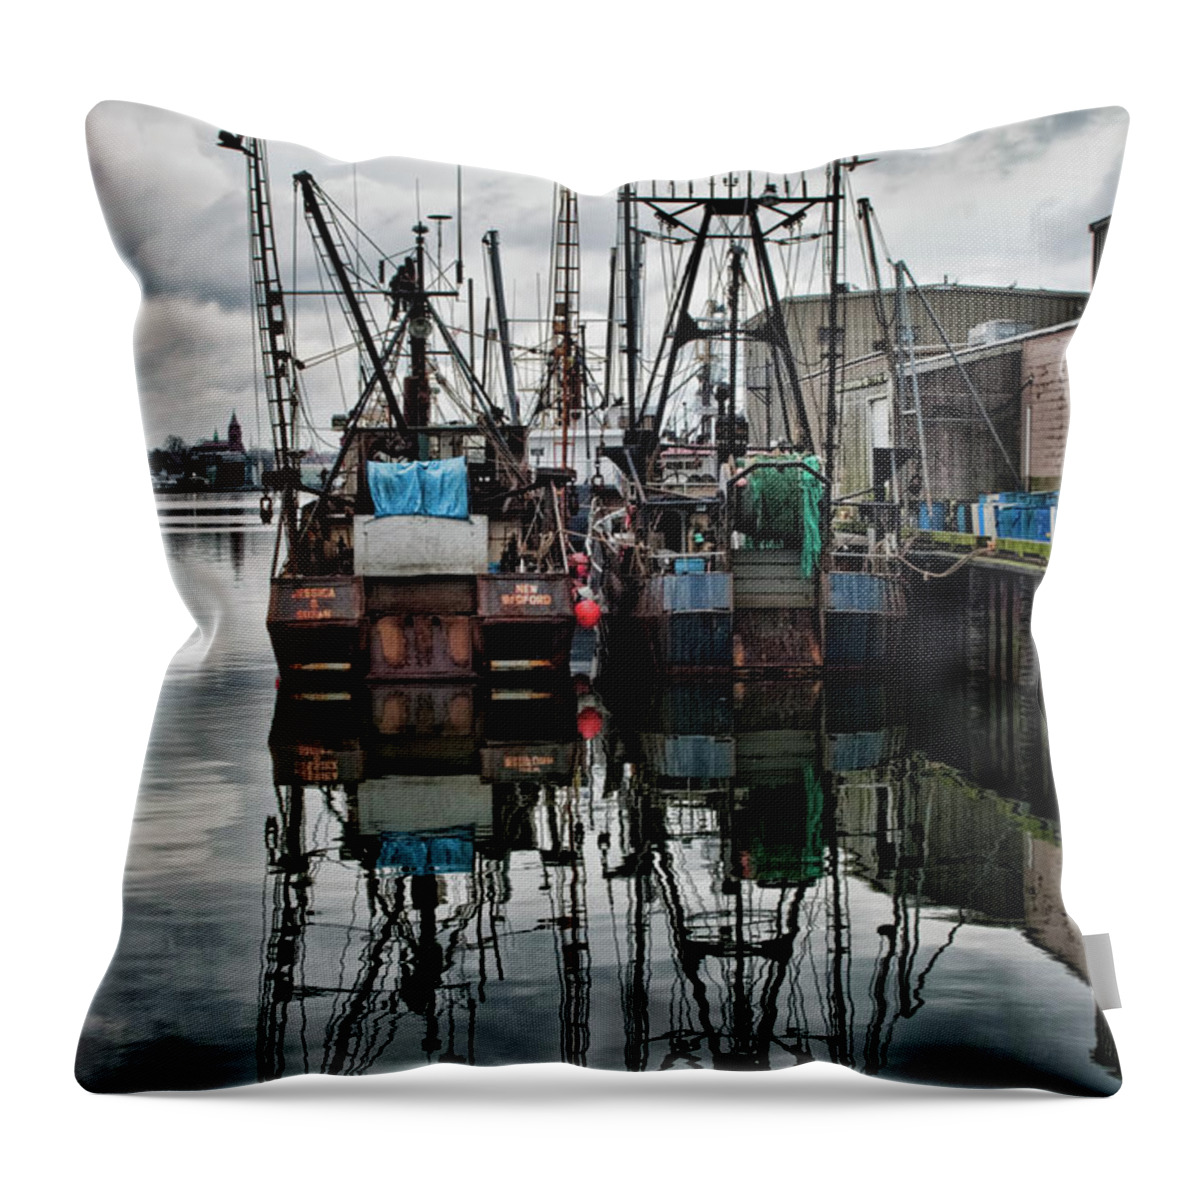 New Bedford Throw Pillow featuring the photograph New Bedford Waterfront No. 1 - Color by David Gordon